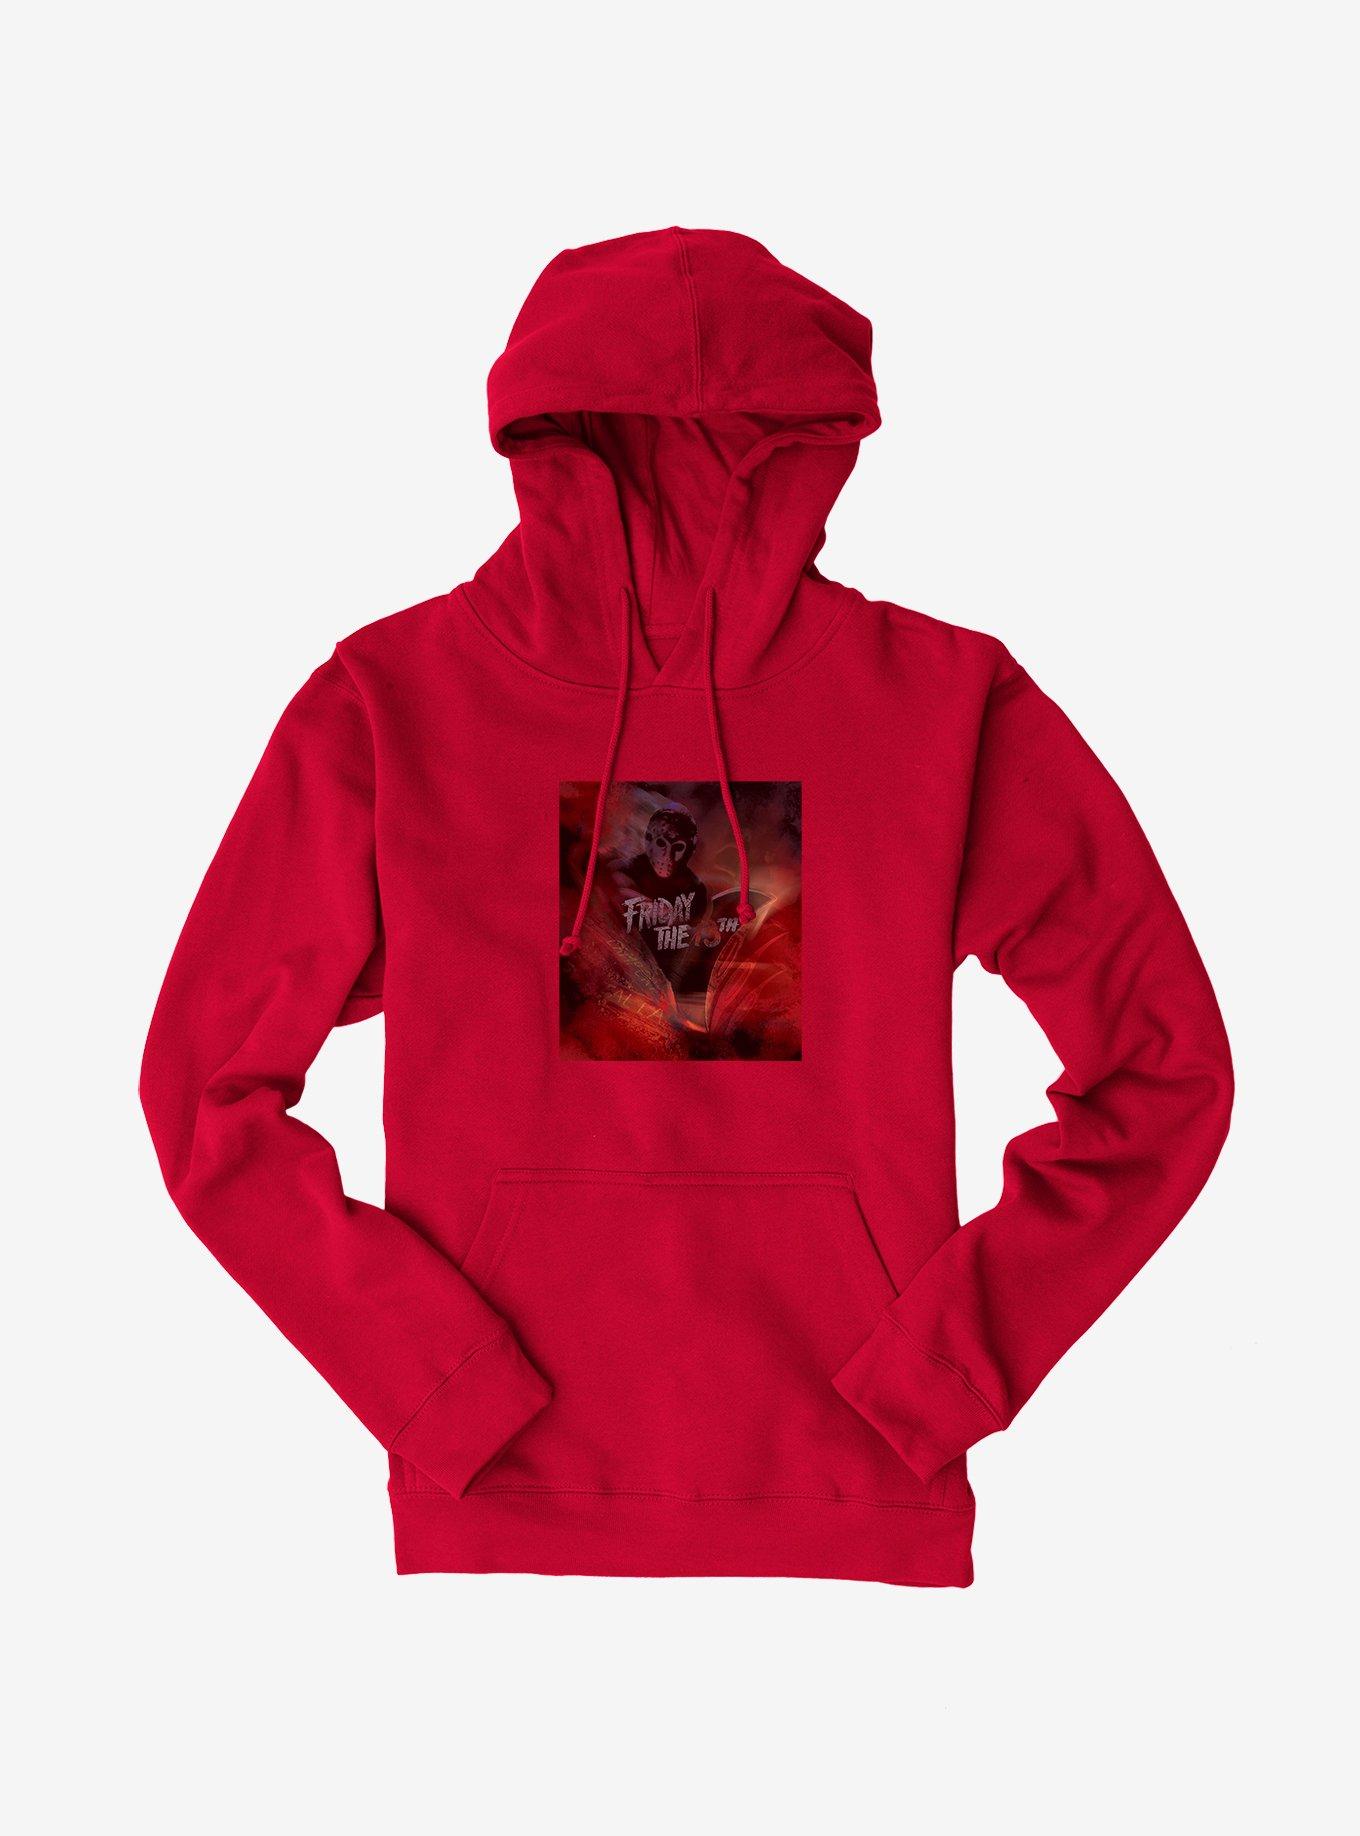 Friday The 13th Fog Hoodie, , hi-res